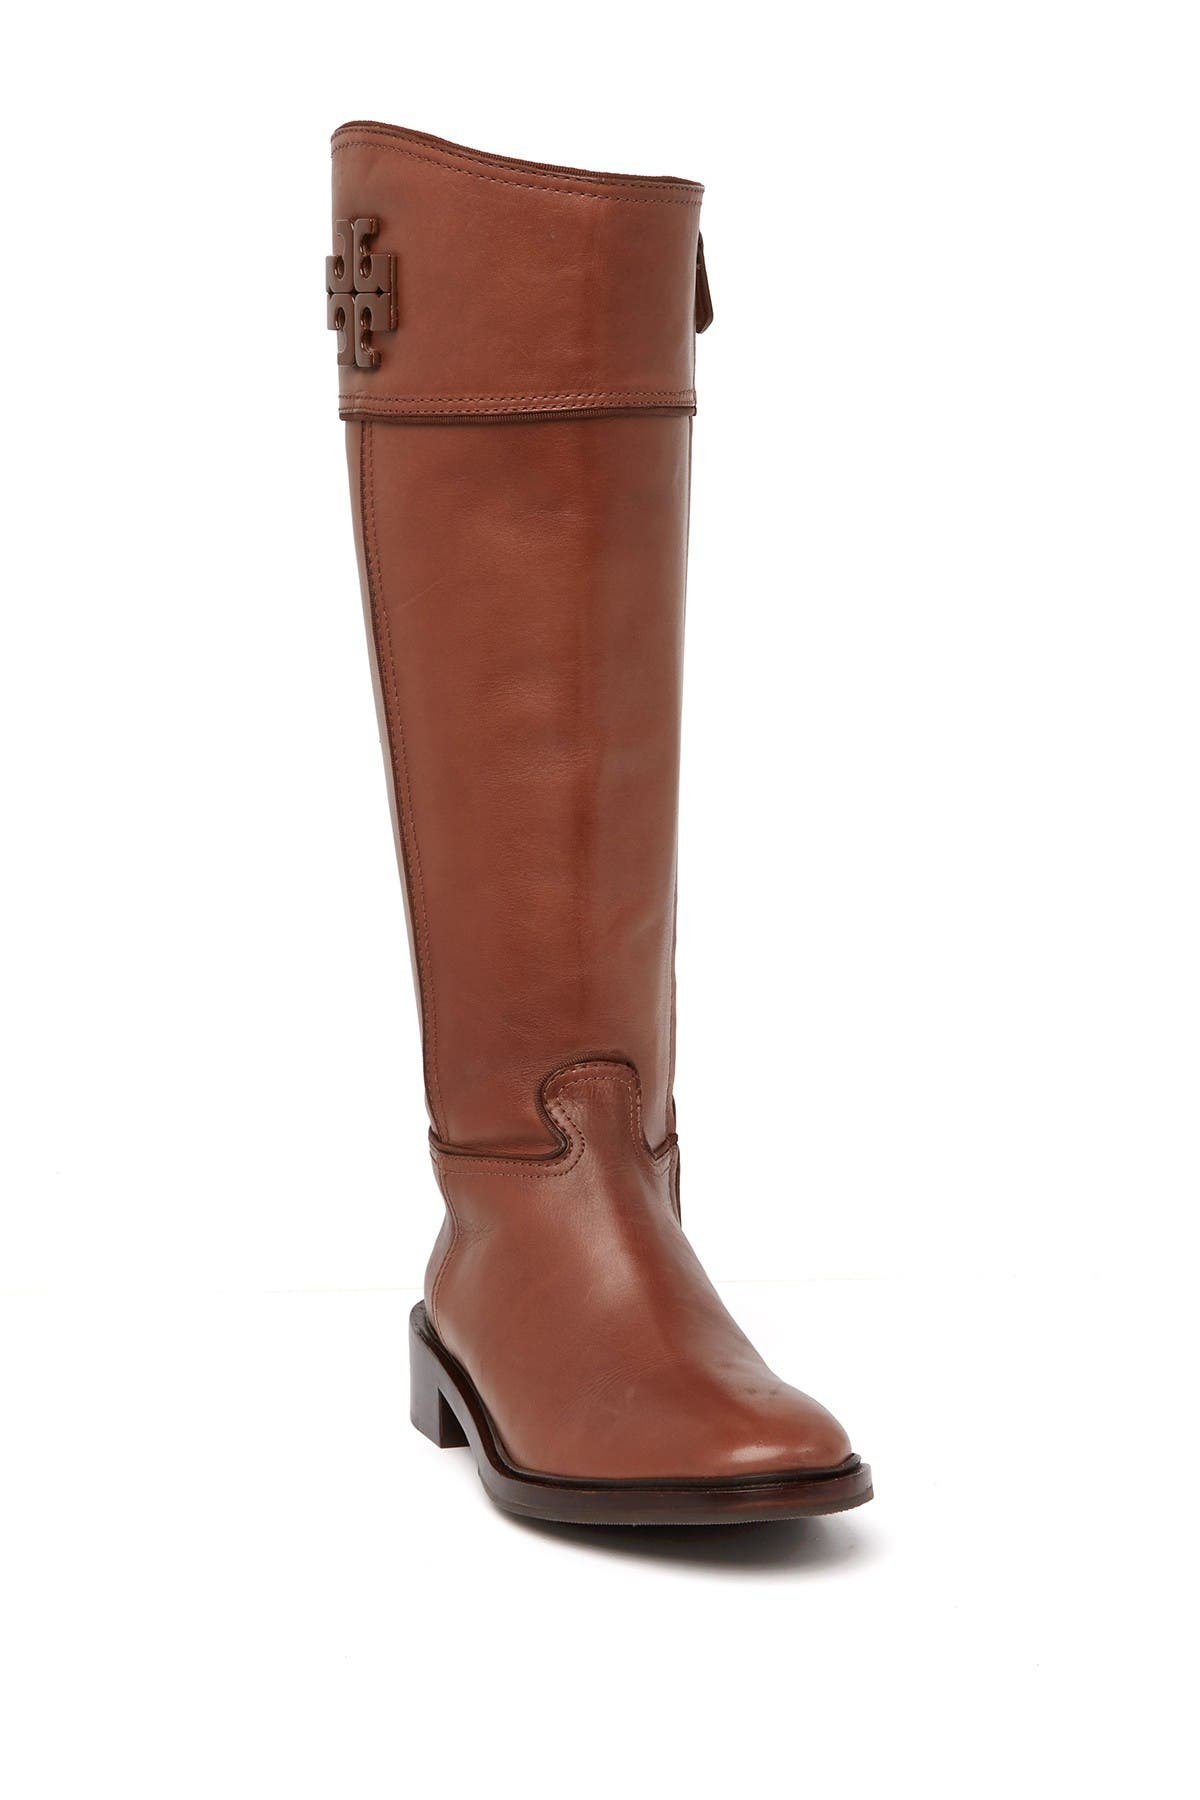 Tory Burch | Lowell 2 Riding Boot 